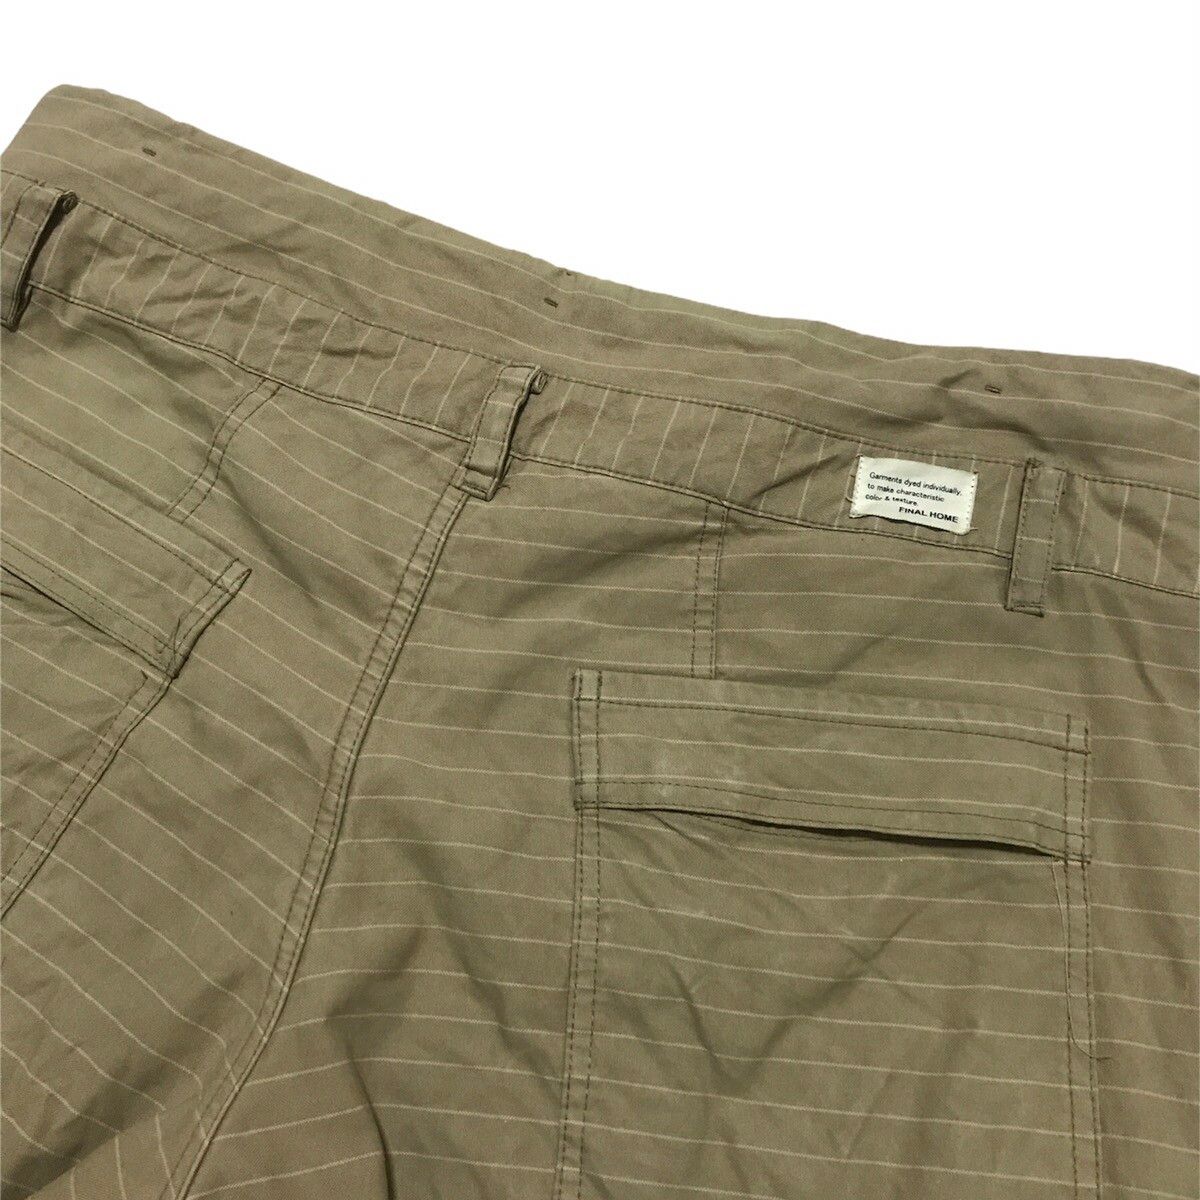 Final Home Military trouser pants - 7